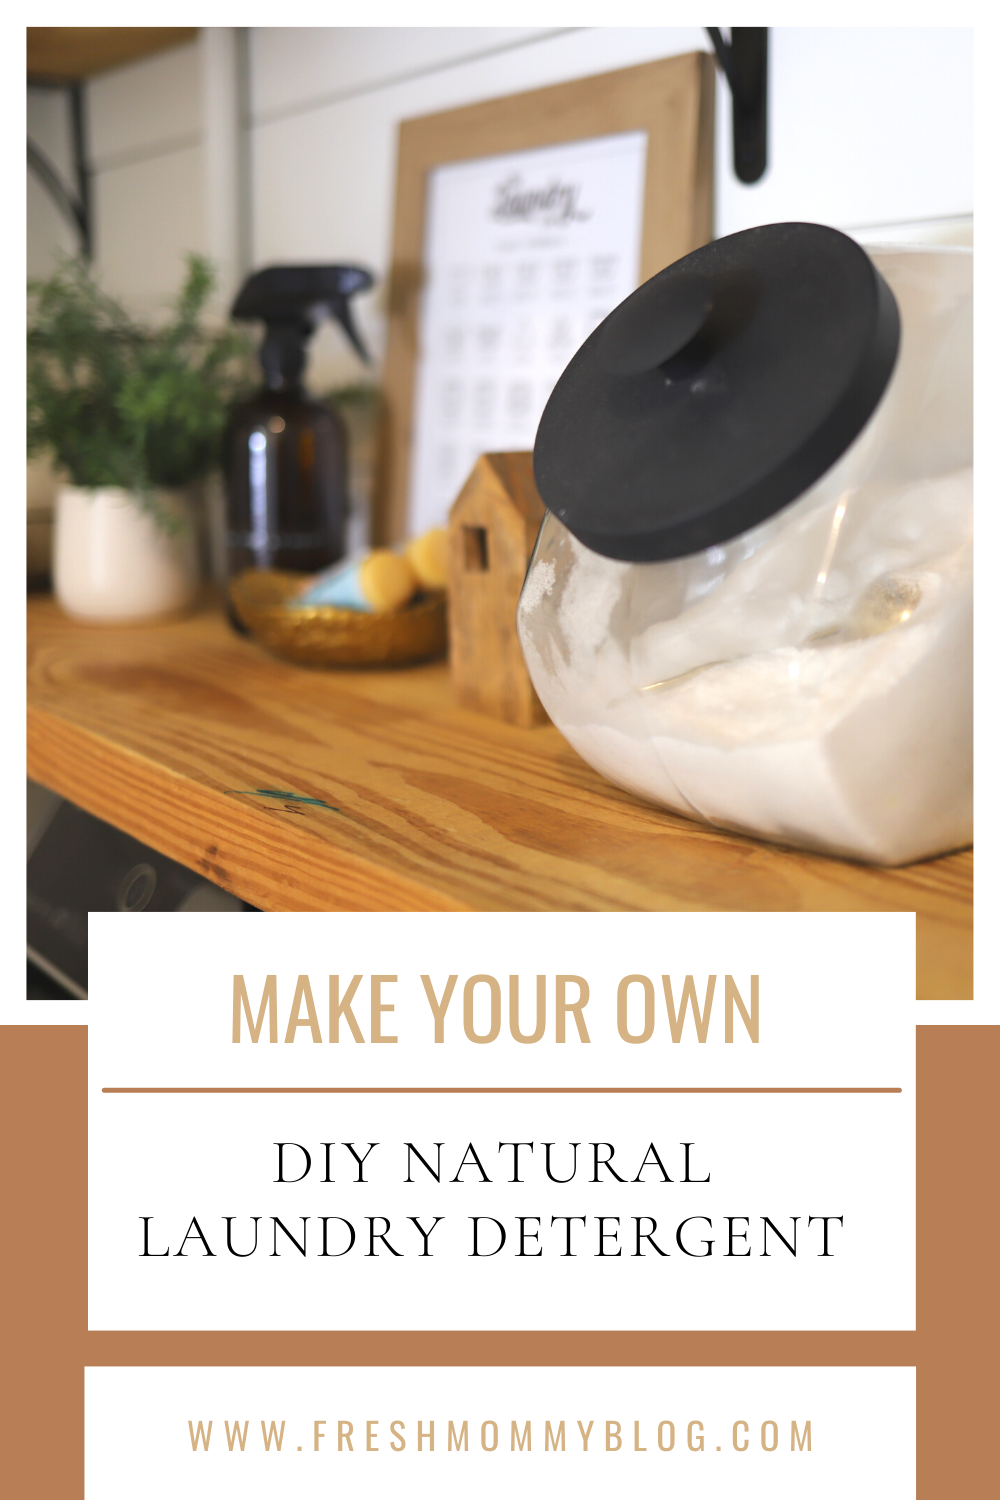 DIY NATURAL LAUNDRY DETERGENT! Are you looking for an easy and natural laundry detergent? If so, you’re in the right place! This DIY natural laundry detergent recipe is made with simple ingredients and ready to use in less than 5 minutes! All you need are 4 ingredients that you probably already have in your pantry or are inexpensive to buy. Add essential oils like lemon oil for a cleaning boost and whitening power!